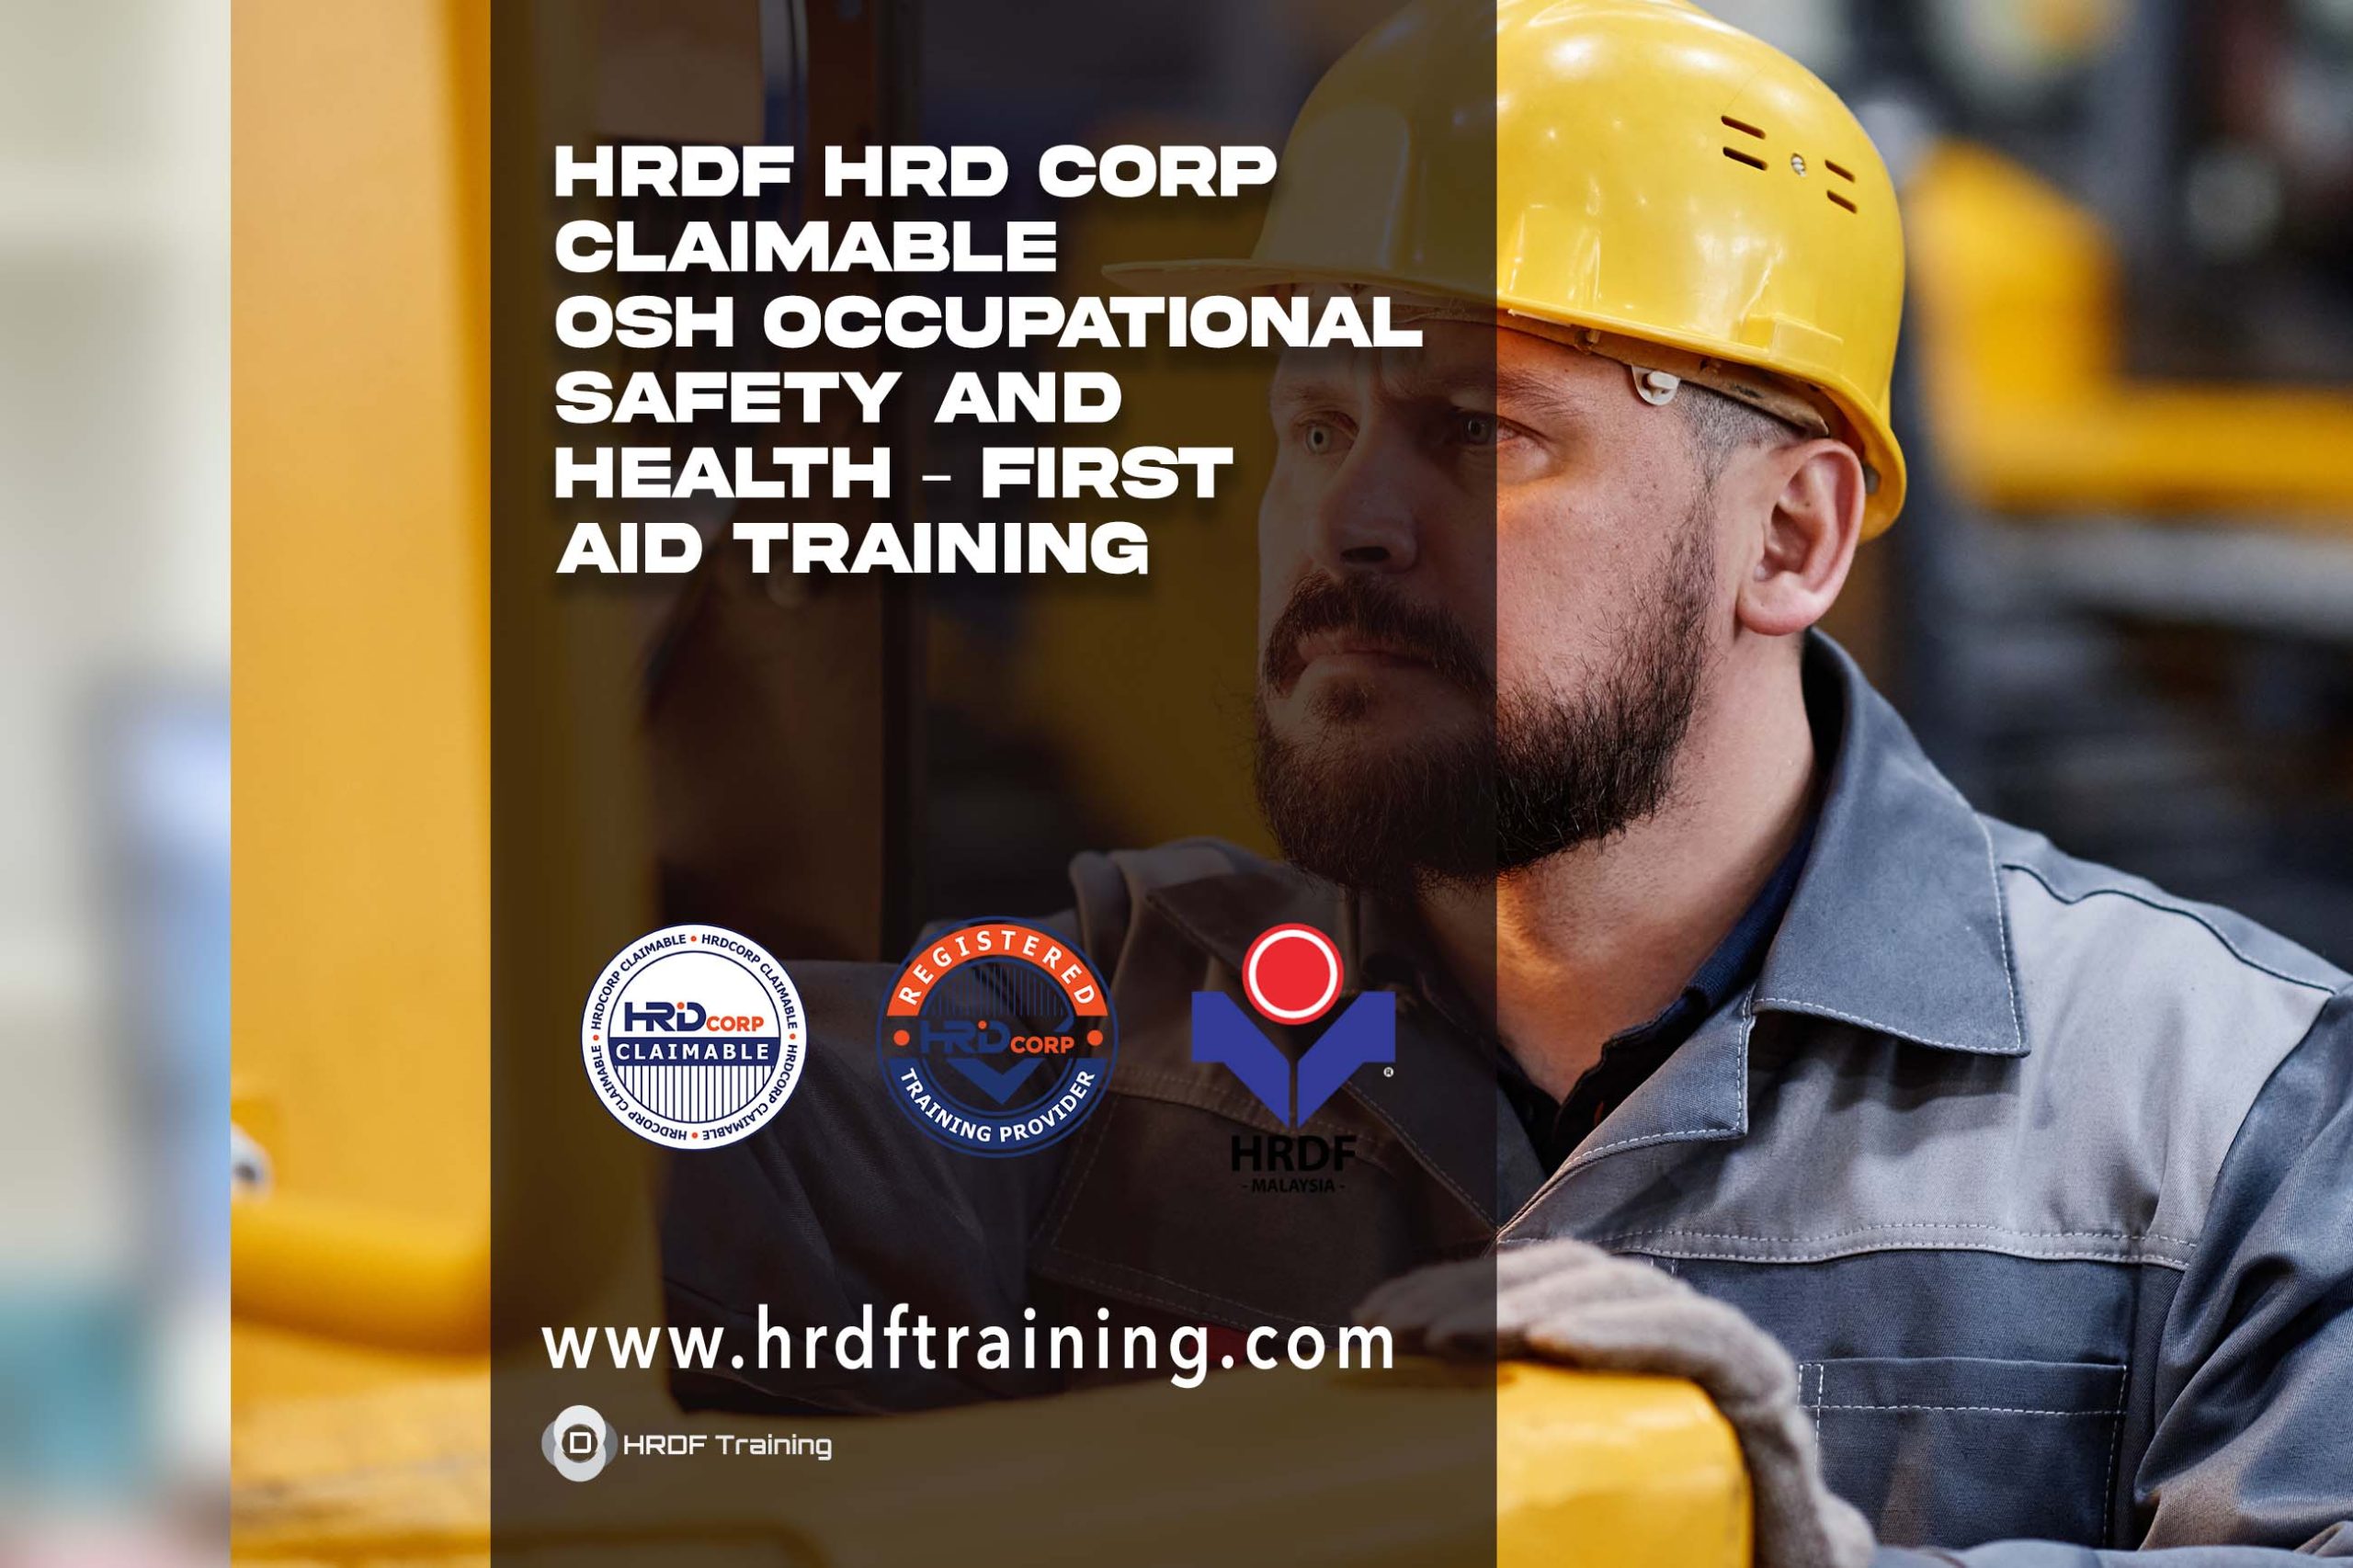 HRDF HRD Corp Claimable OSH Occupational Safety and Health – First Aid Training